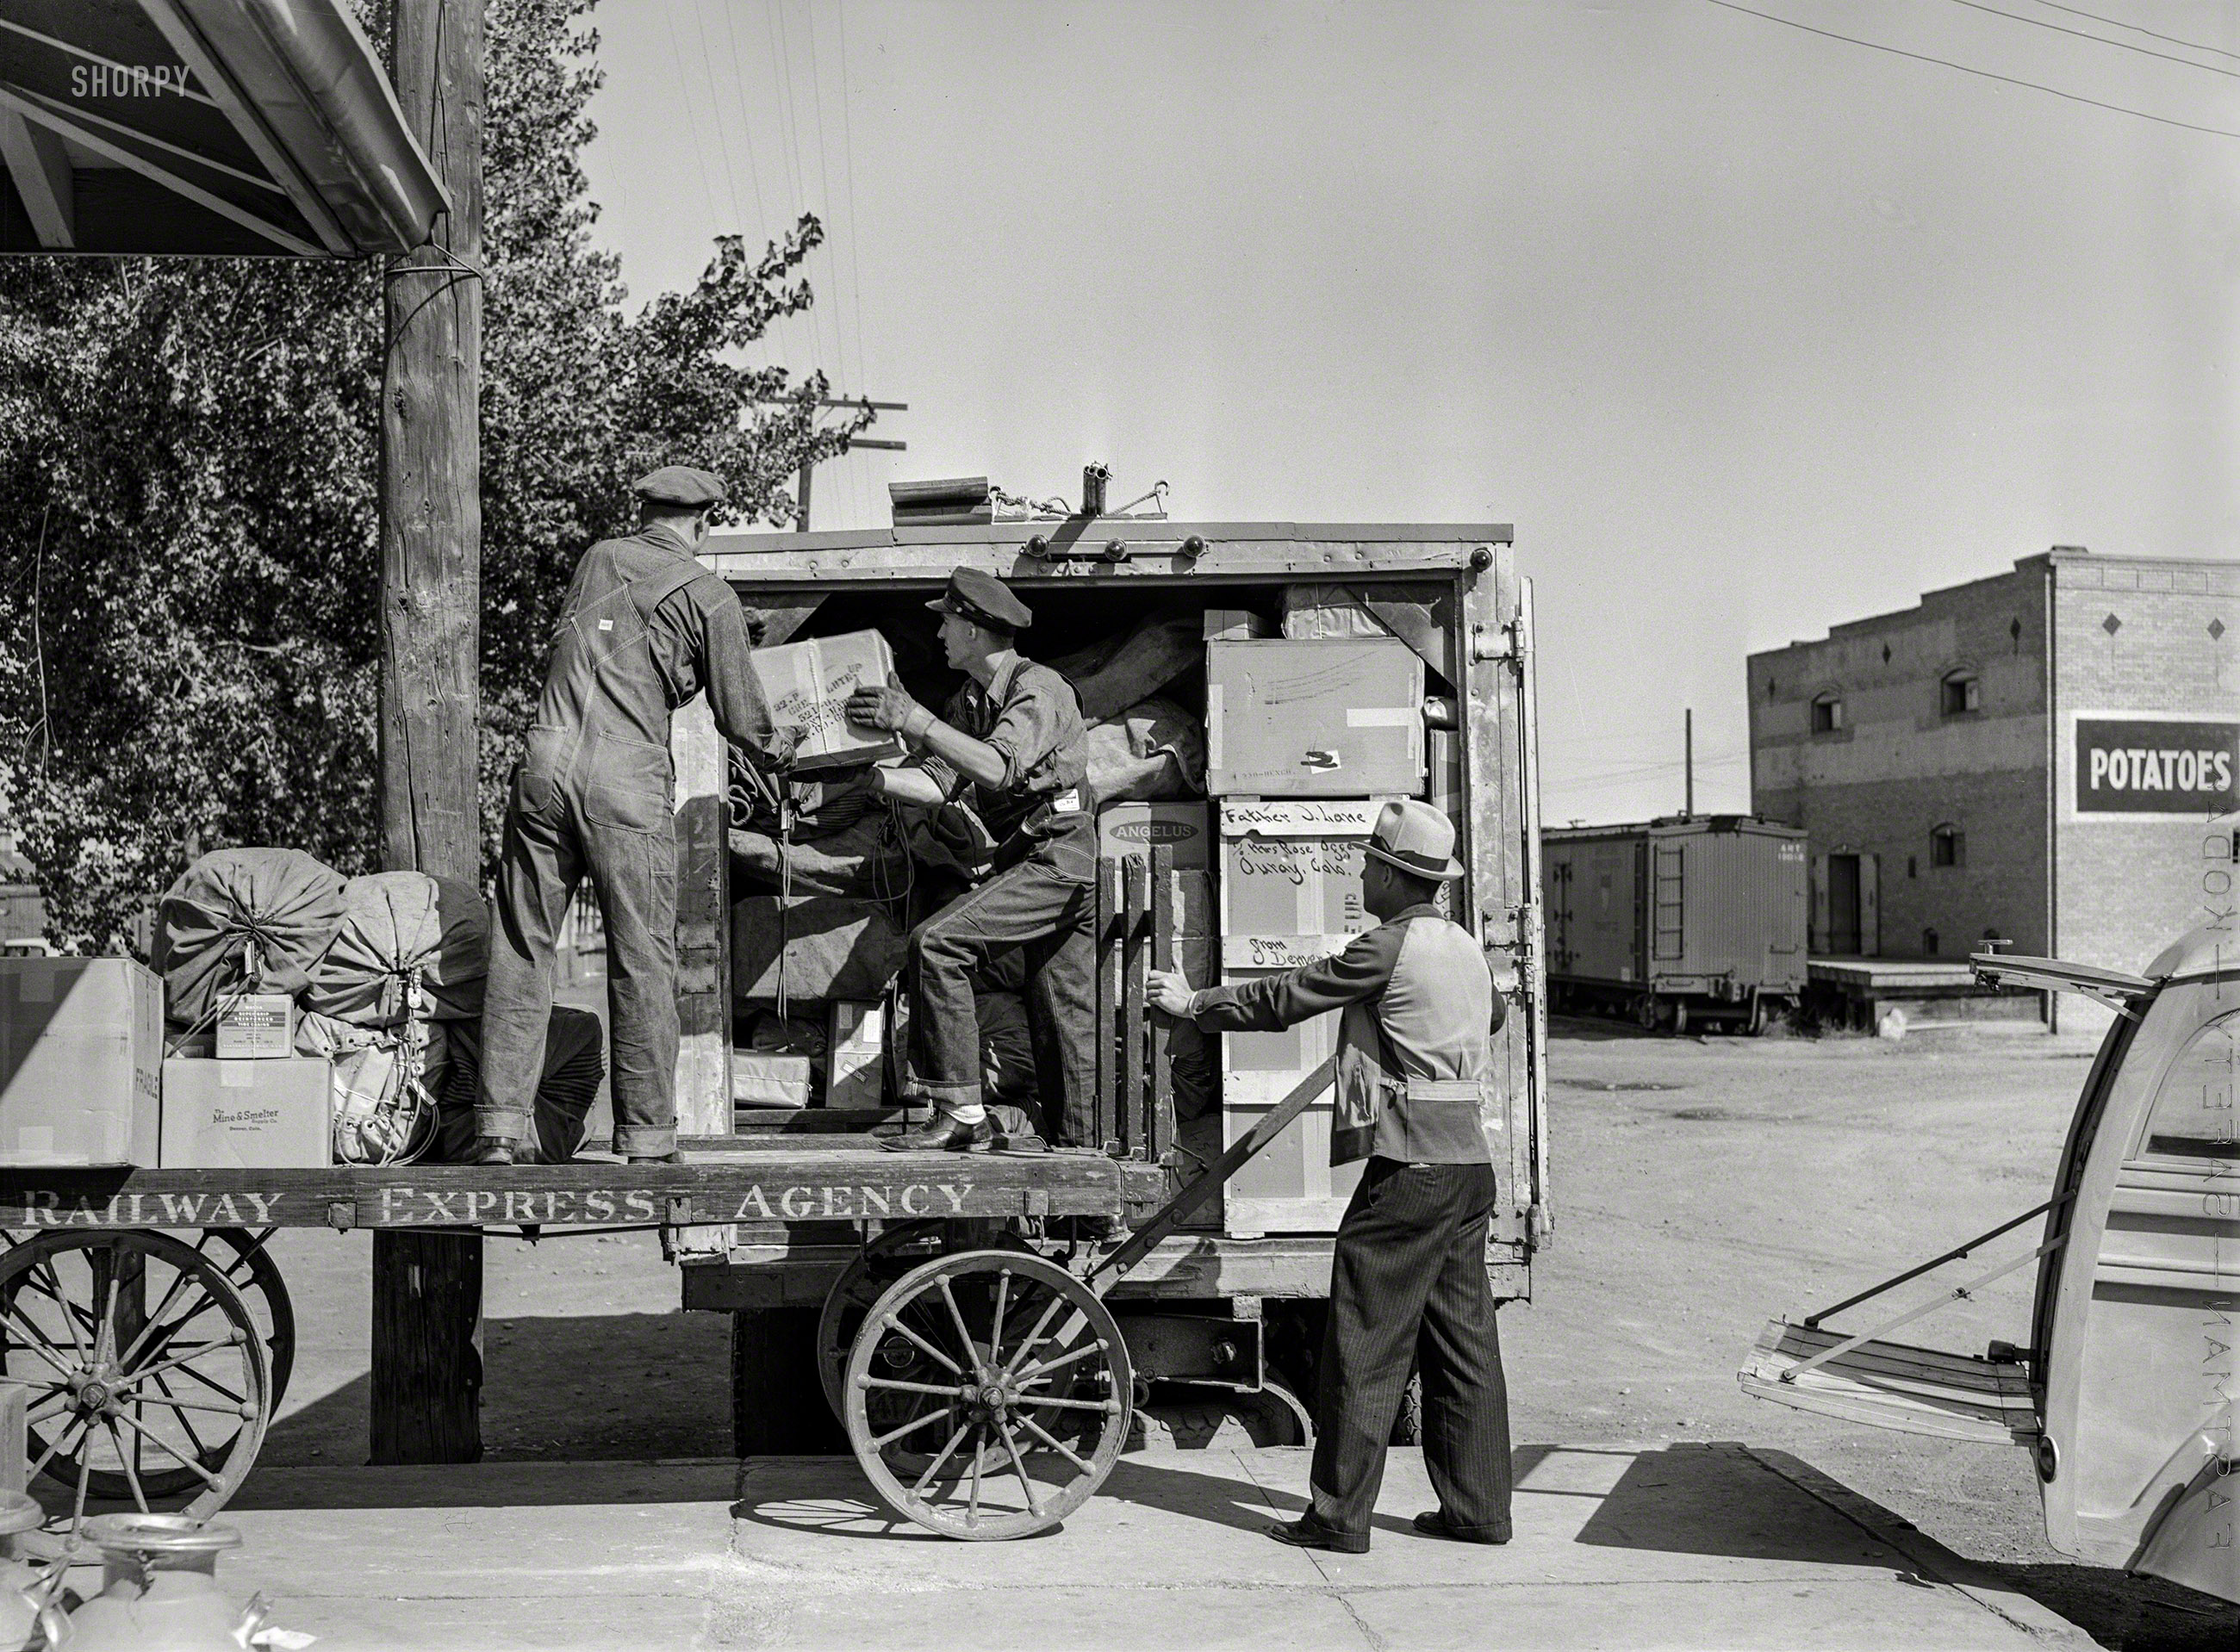 September 1940. Montrose, Colorado. "Loading express packages into Denver & Rio Grande Western truck, which takes them to points on the narrow gauge railroad where passenger and express service is not otherwise available." Acetate negative by Russell Lee for the Farm Security Administration. View full size.